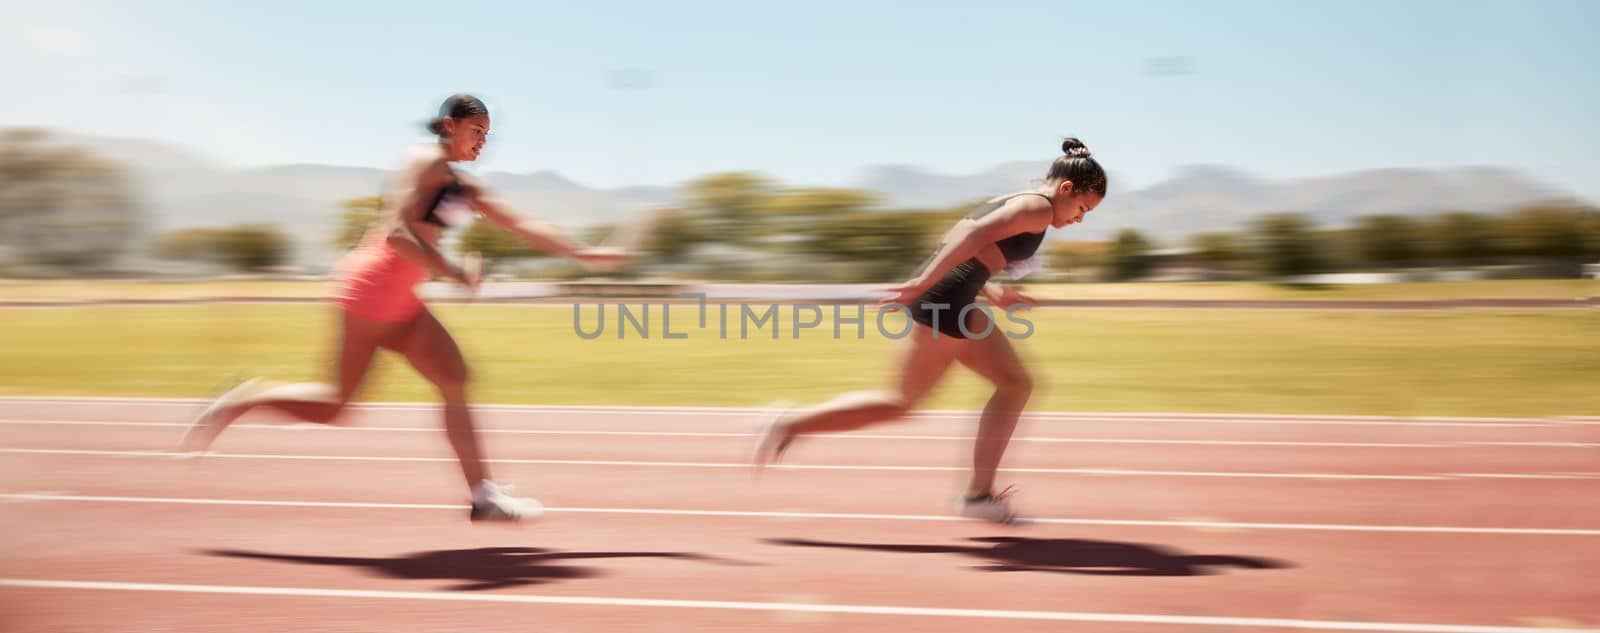 Sports, fitness and relay race with a woman athlete passing a baton to a teammate during a track race. Running, teamwork and health with a female runner and partner racing for competitive sport by YuriArcurs